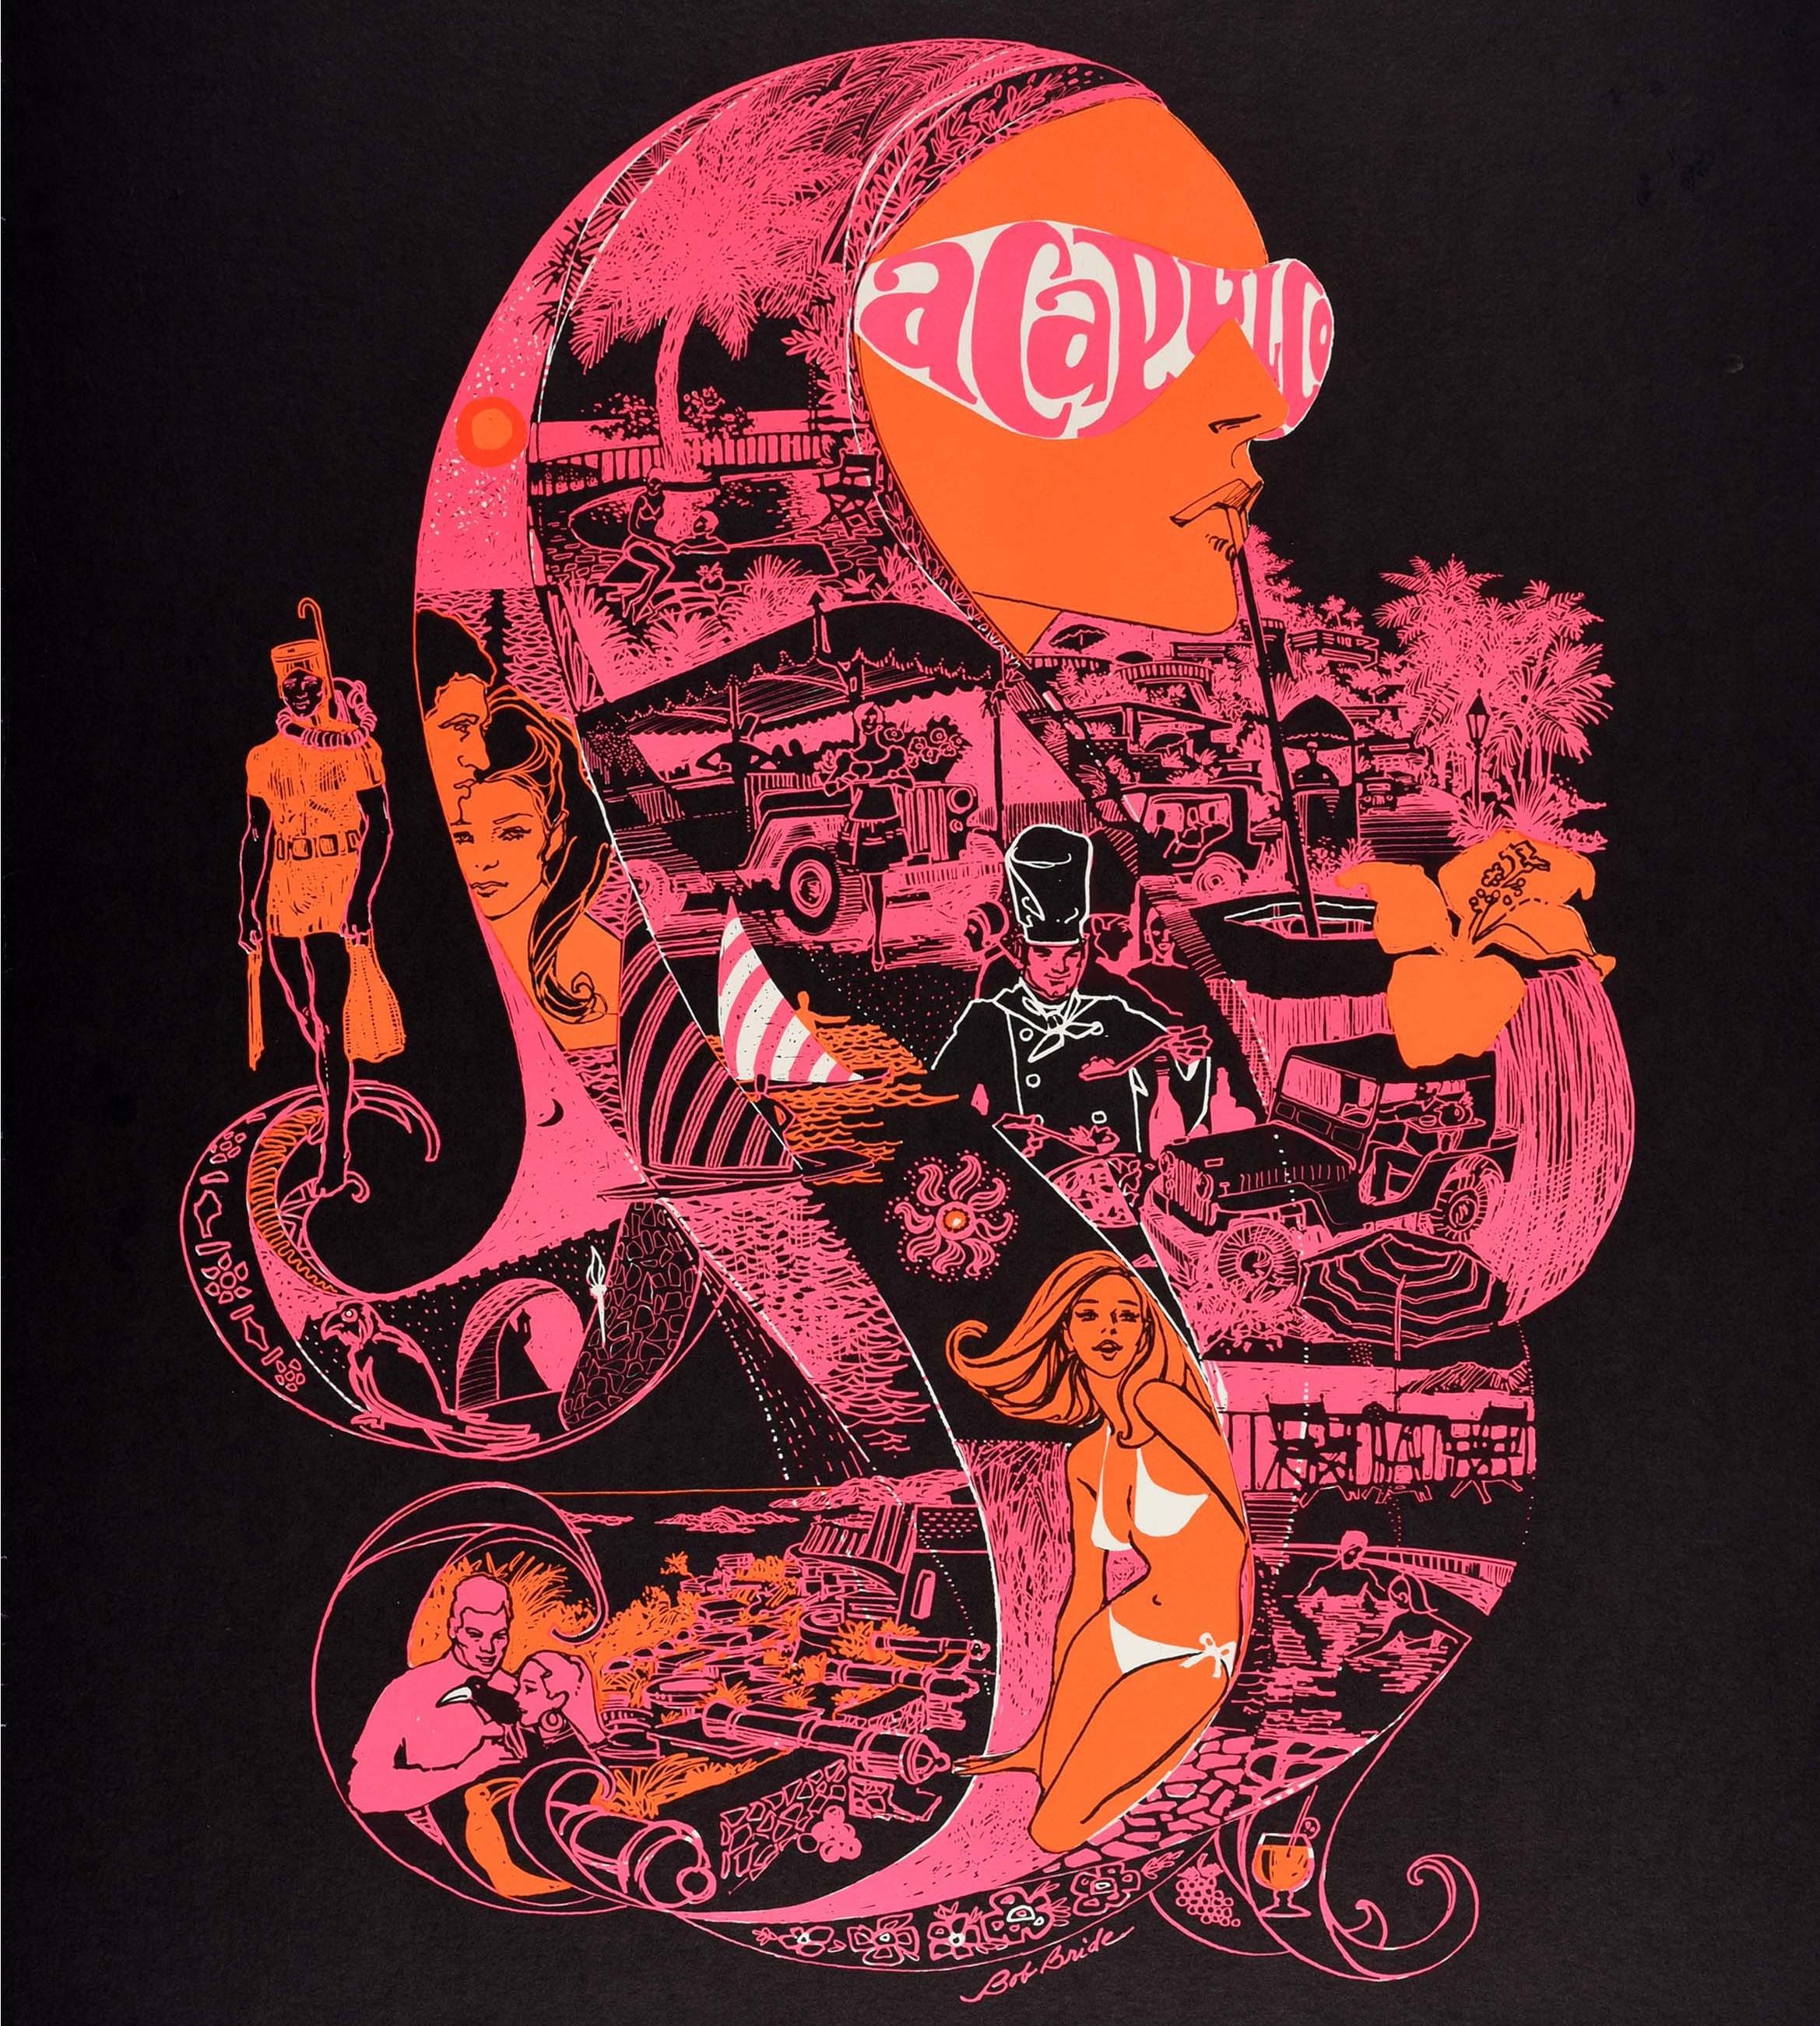 Original vintage travel advertising poster for Acapulco Aeronaves de Mexico Mexico's Largest Airline featuring a colourful design by the illustrator and poster artist Bob Bride (b 1933) showing a psychedelic style image of a lady with the word